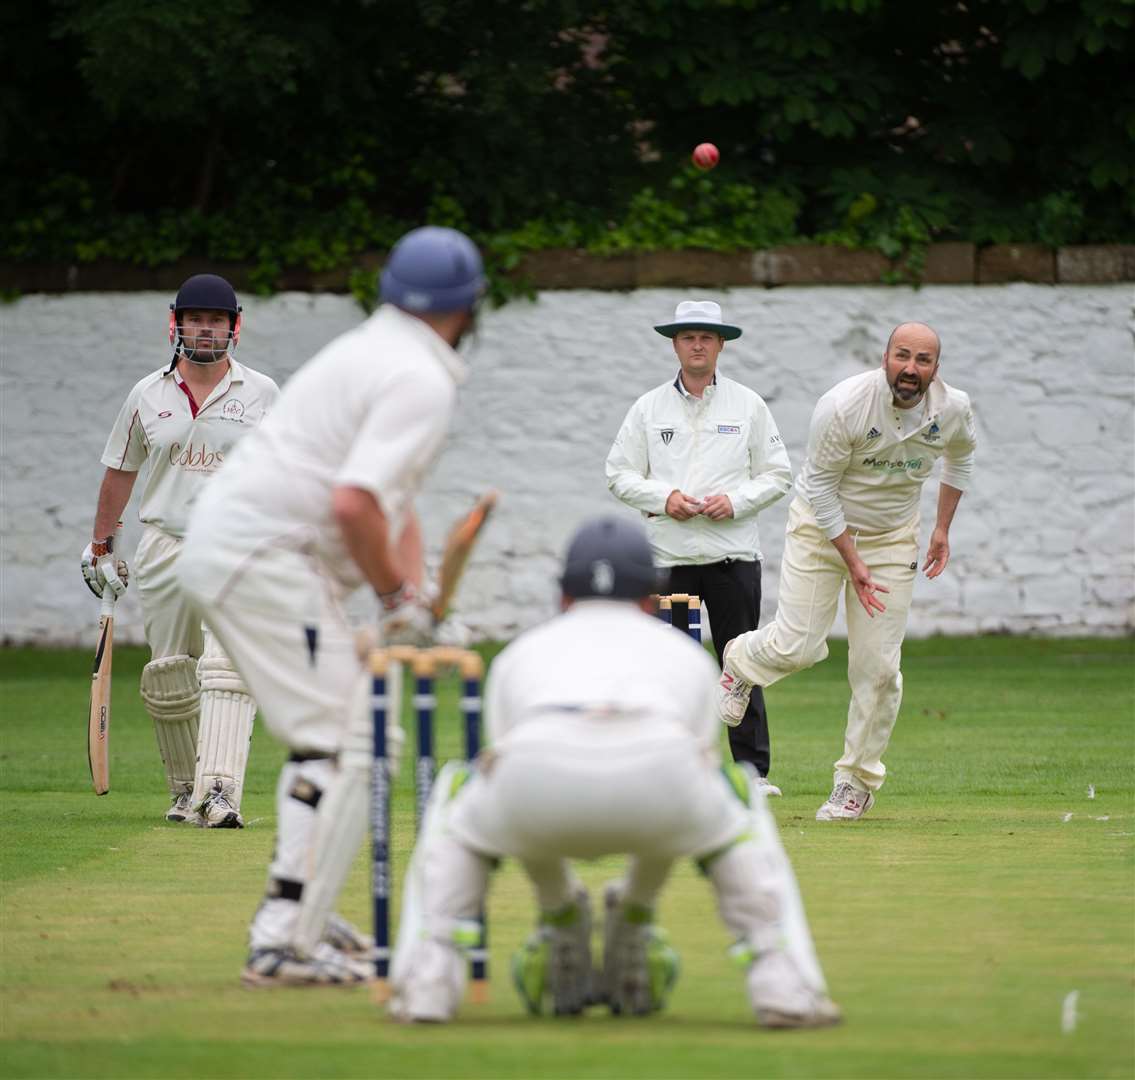 Northern Counties bowler Daniel Johns delivers to Highland's Rob Nixon in the first league derby earlier this season. Picture: Callum Mackay. Image No.044499.